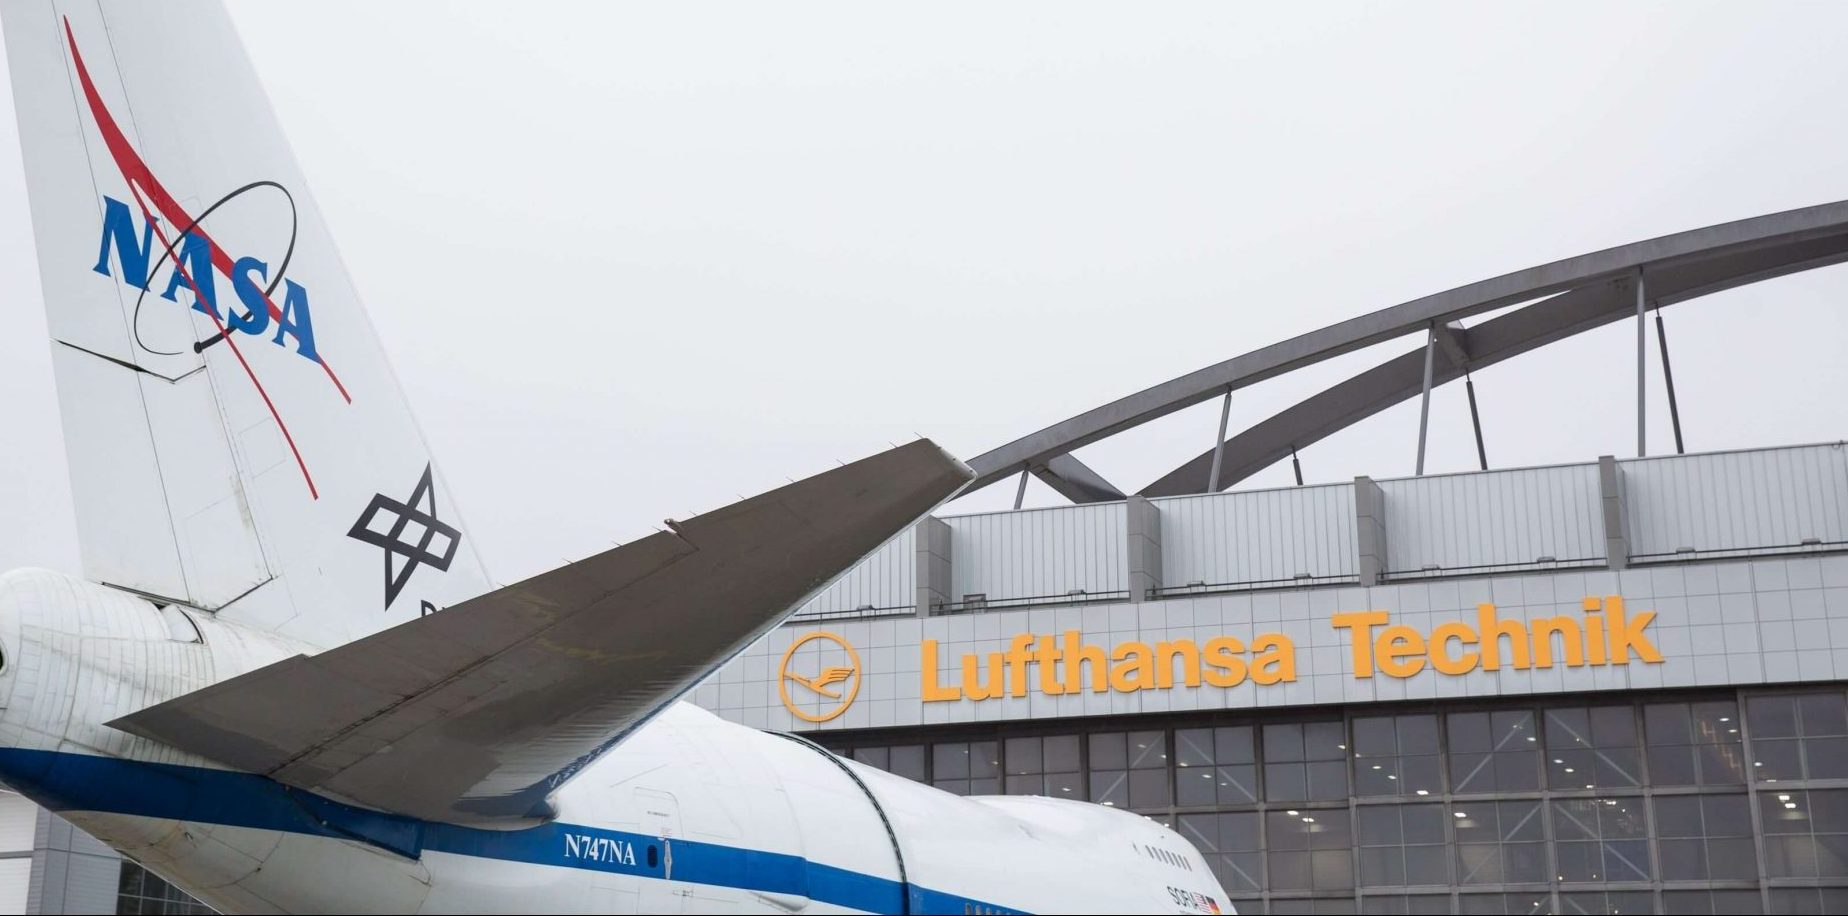 Lufthansa Group sells its European business to Gategroup